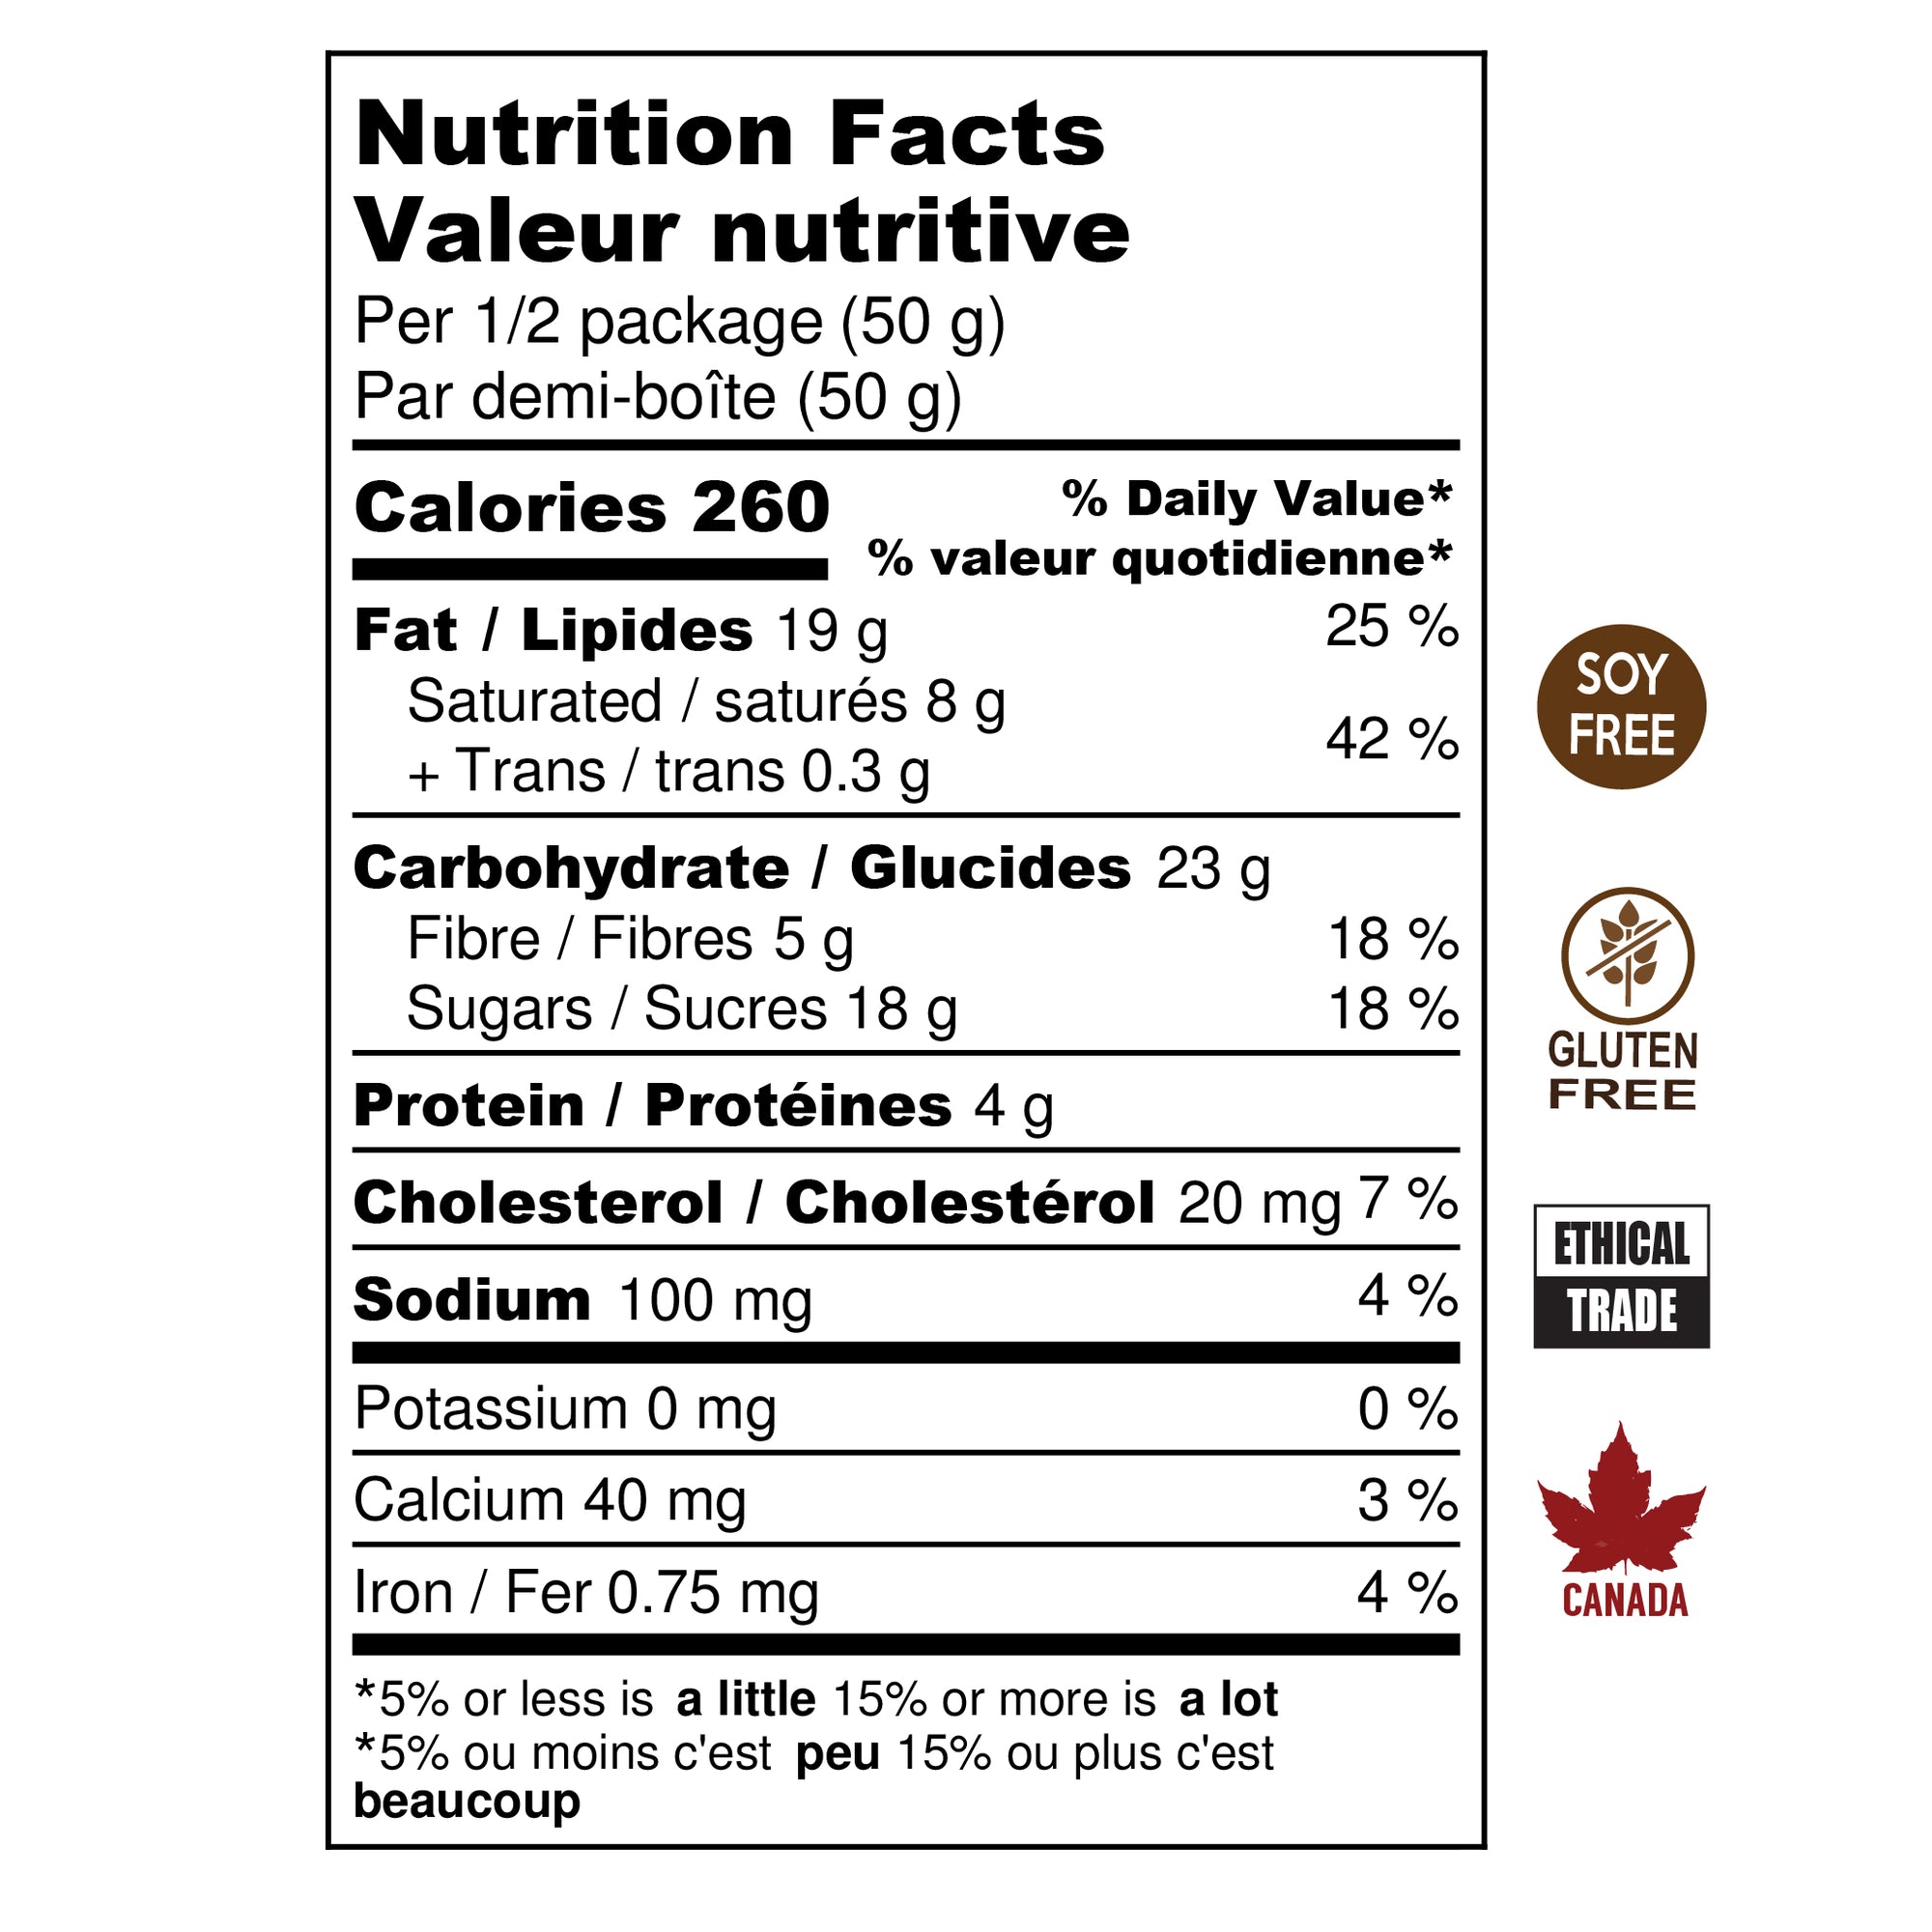 Almond Toffee Bark, Nutrition Facts Table, Soy Free, Gluten Free, Ethical Trade